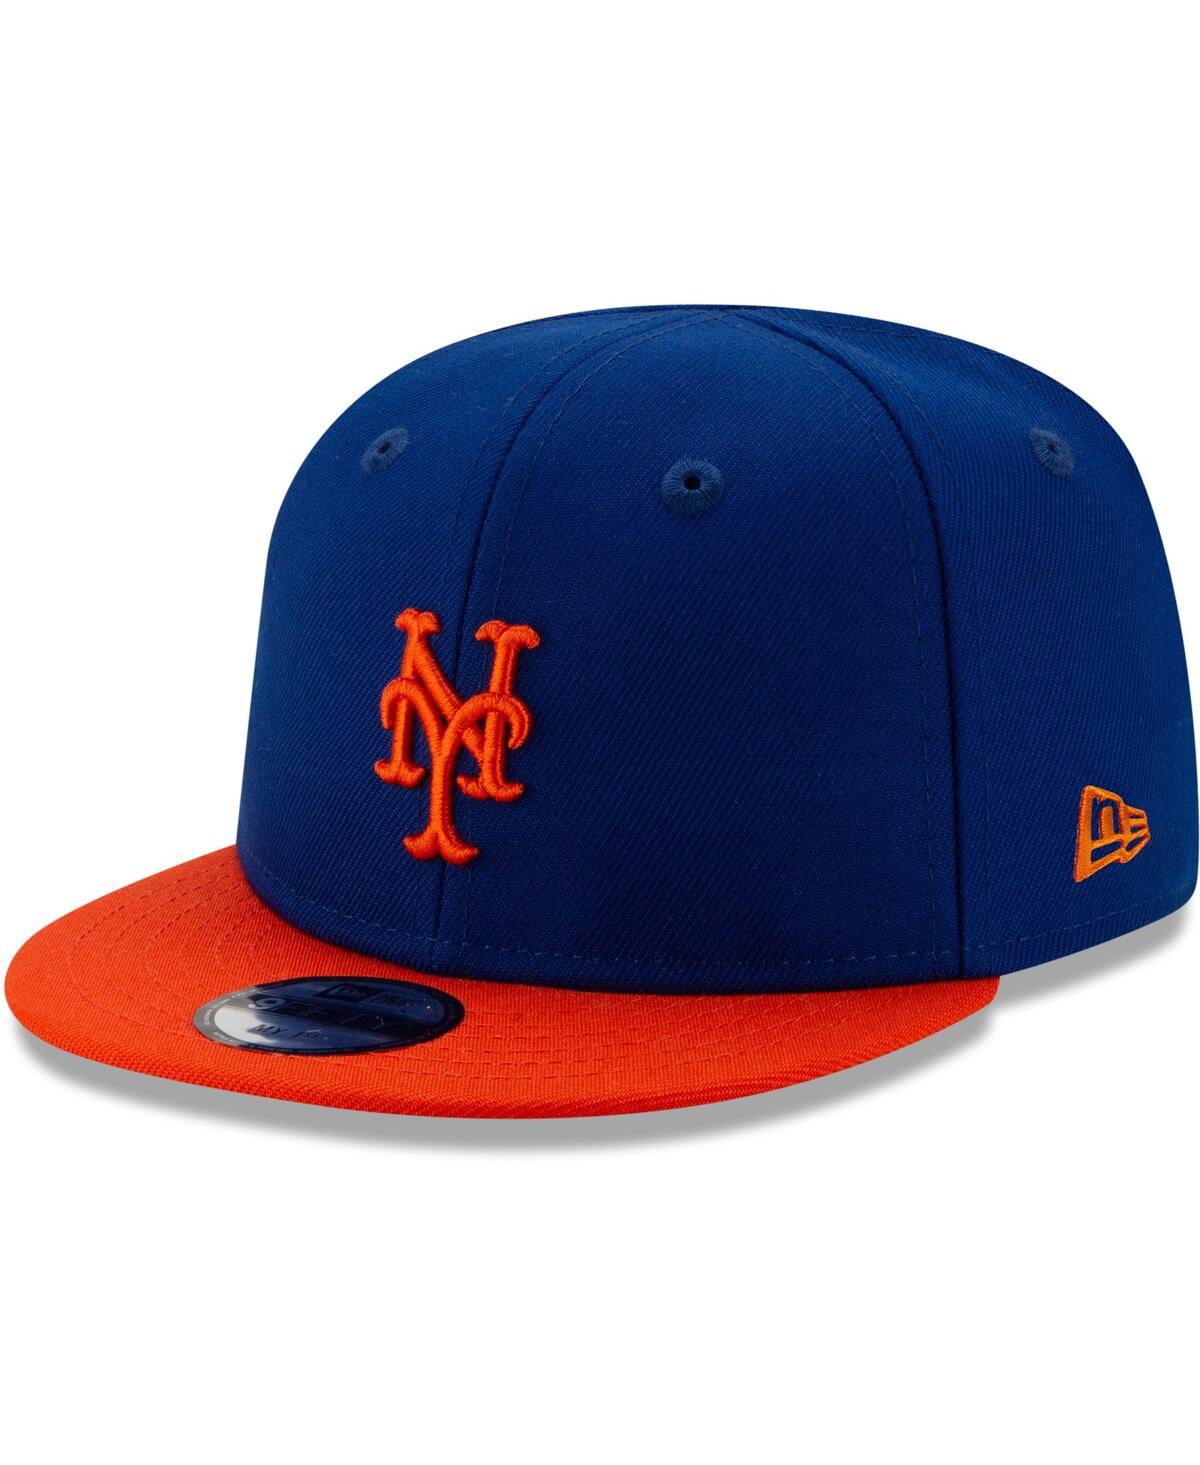 Shop New Era Infant Unisex  Royal New York Mets My First 9fifty Hat